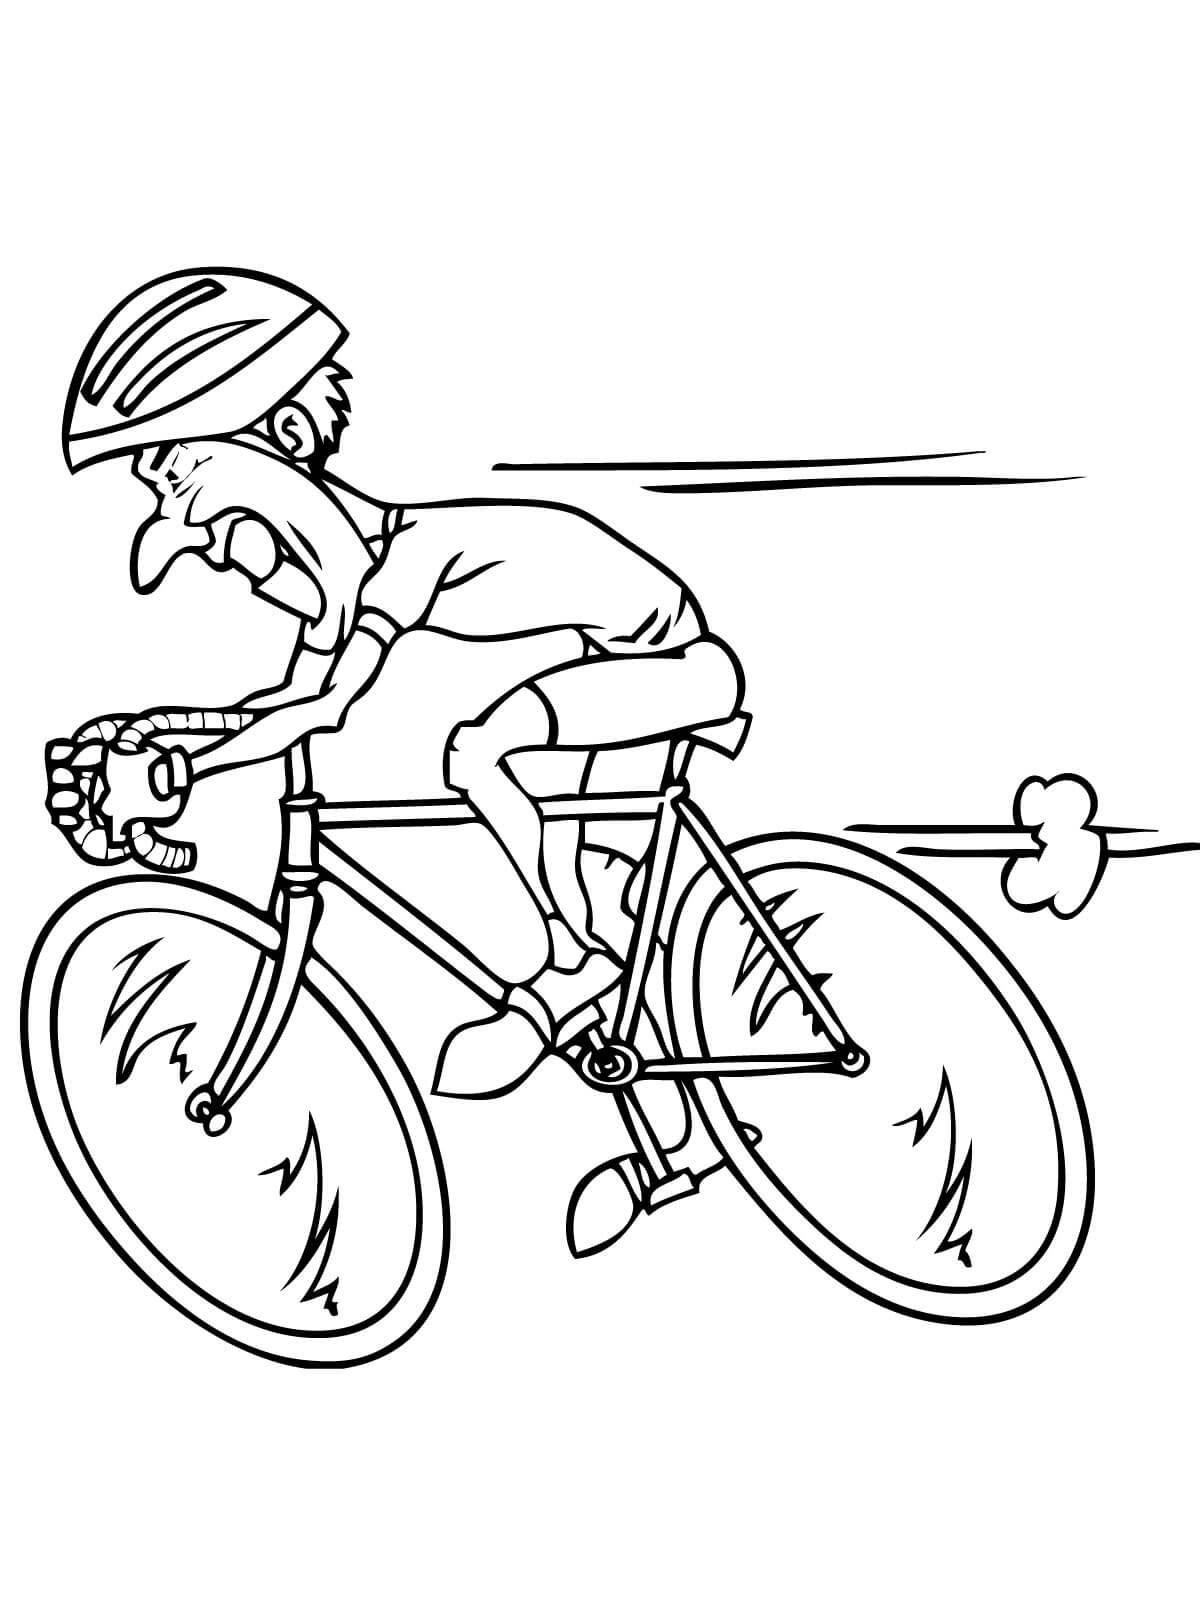 A Cyclist Riding With High Speed Coloring Page - Free Printable